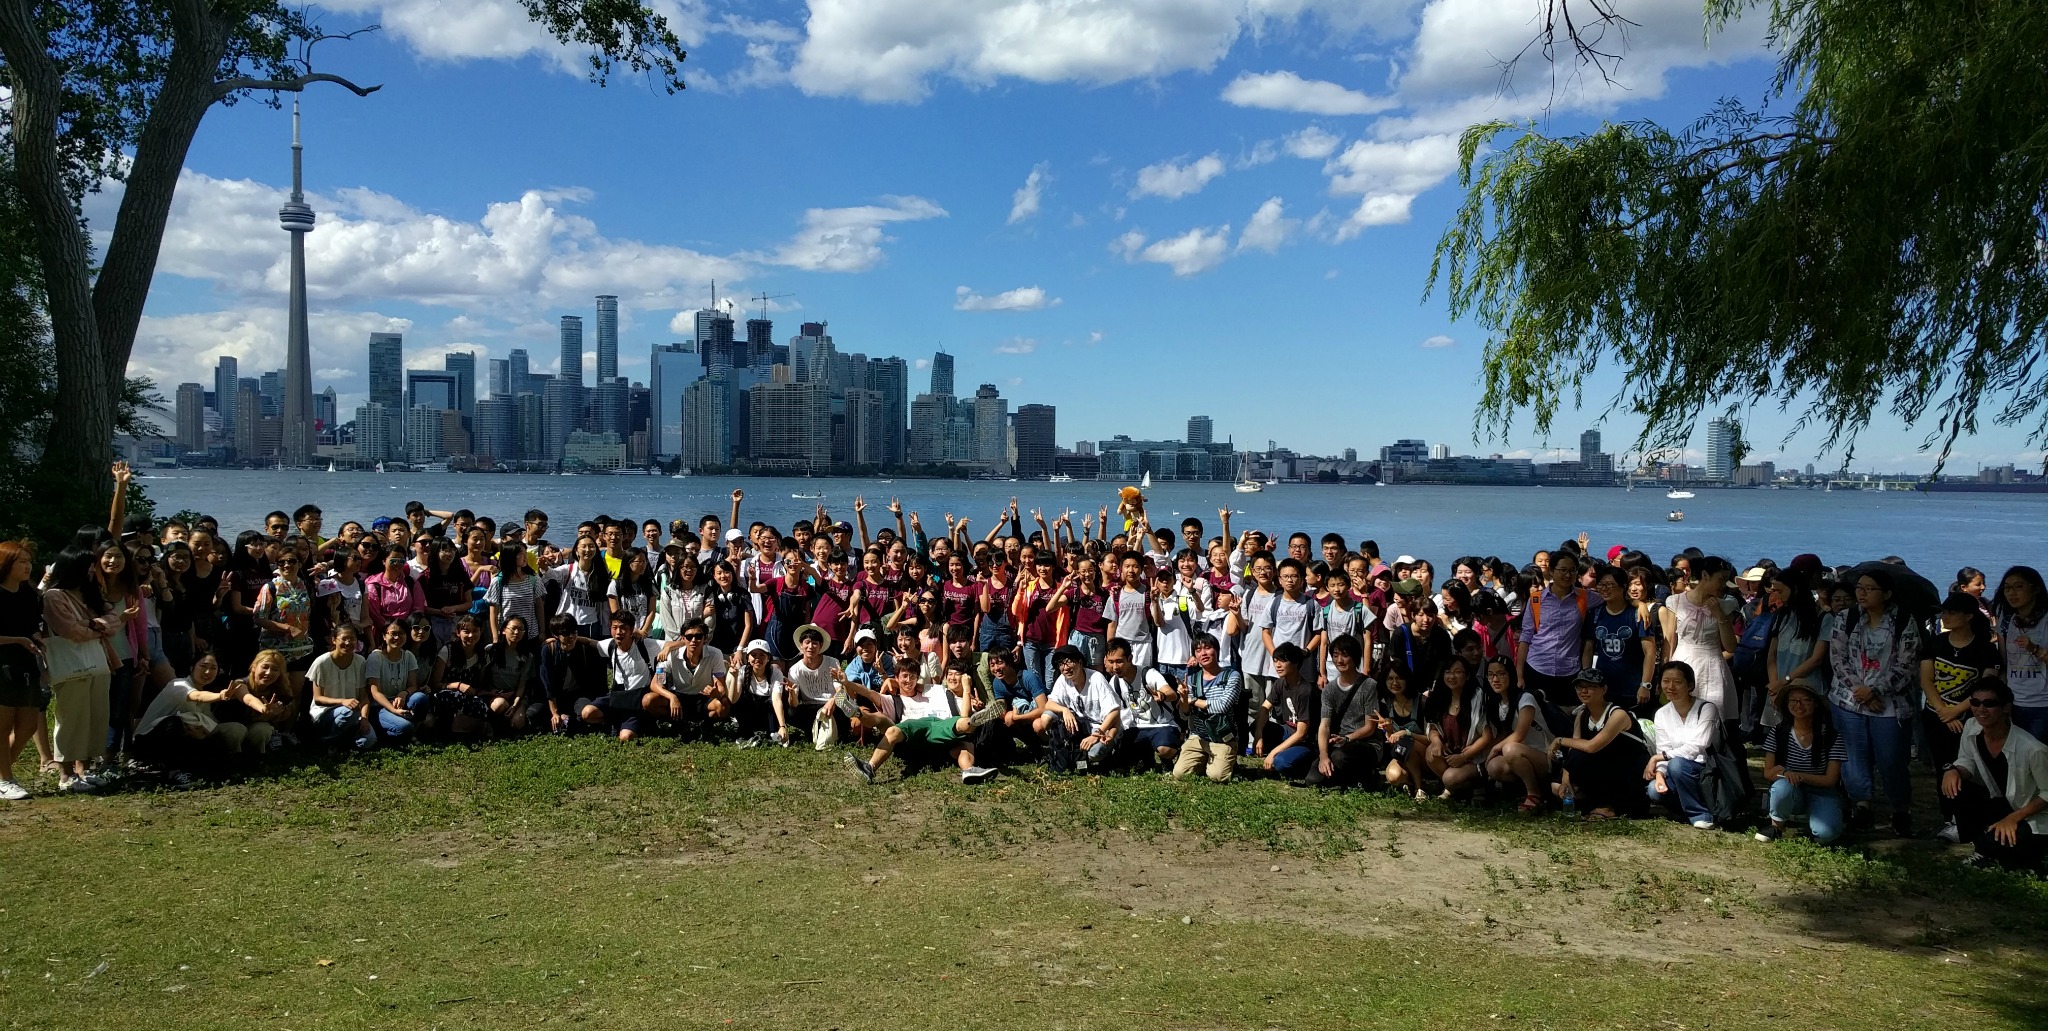 Students in the SummerESL@Mac program visit Centre Island, one of the many excursions they participate in as part of the program.